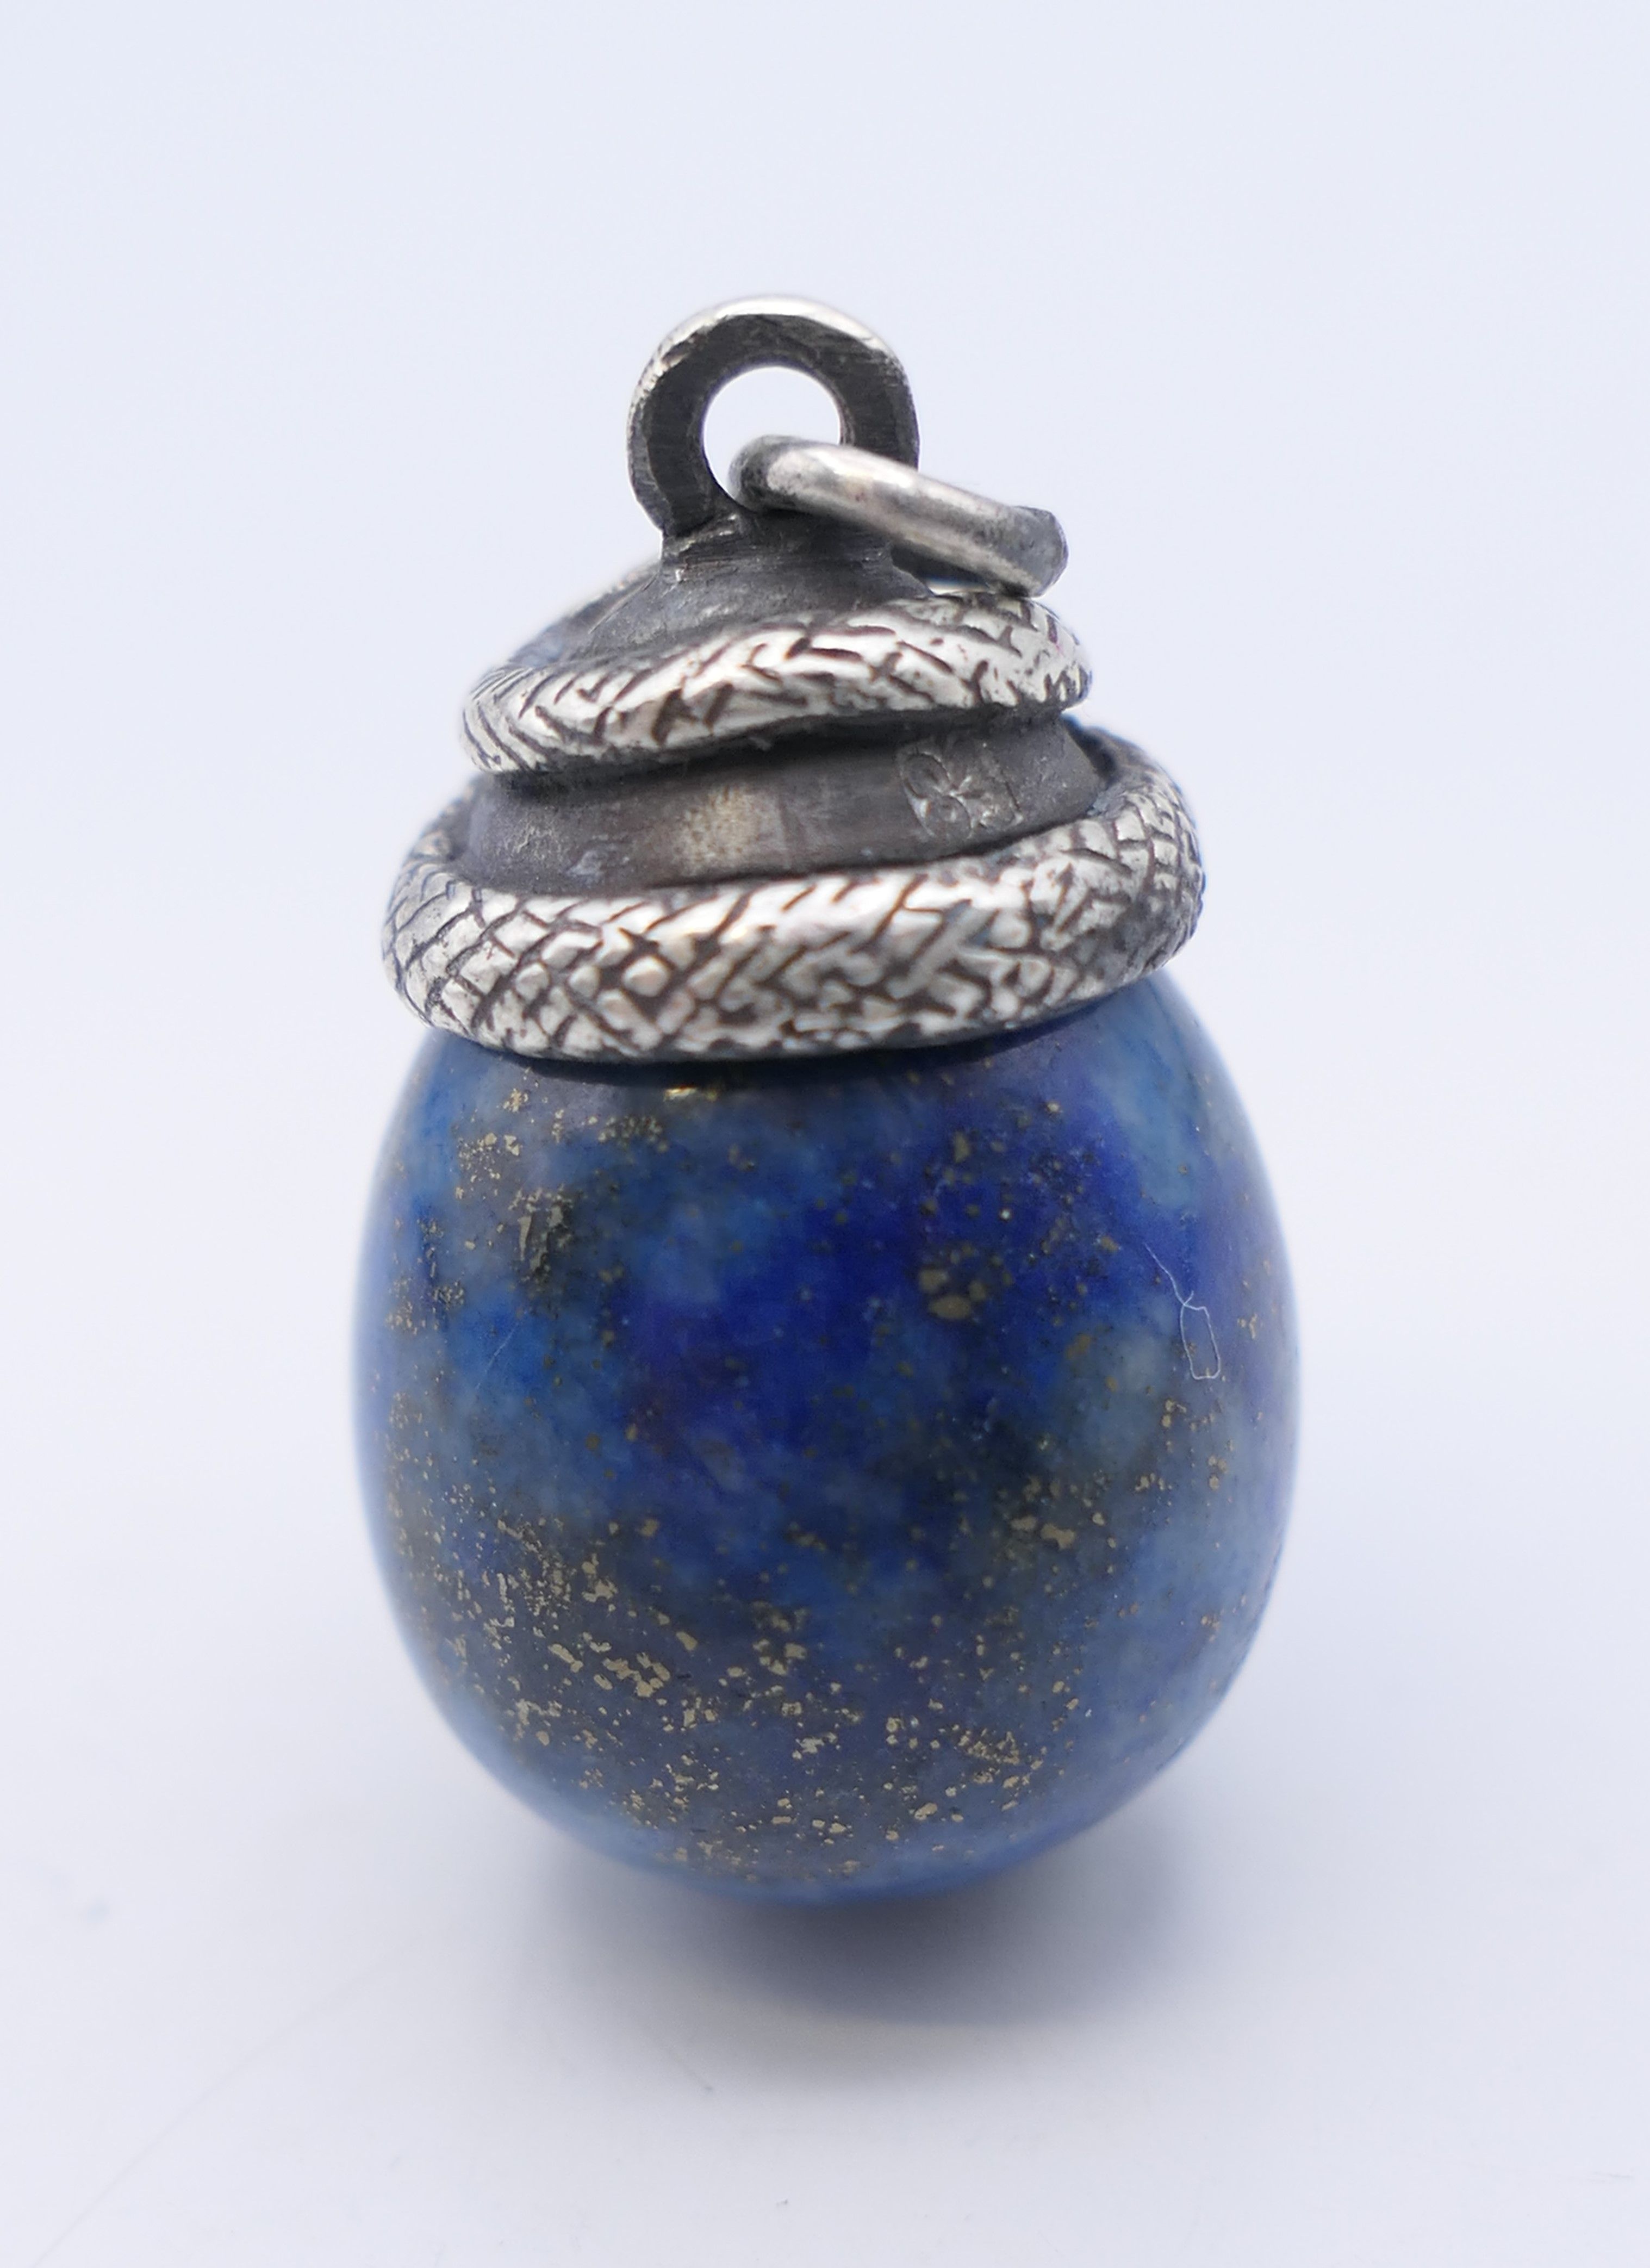 A lapis egg form pendant surmounted with a snake, bearing Russian marks. 2.5 cm high. - Image 2 of 4